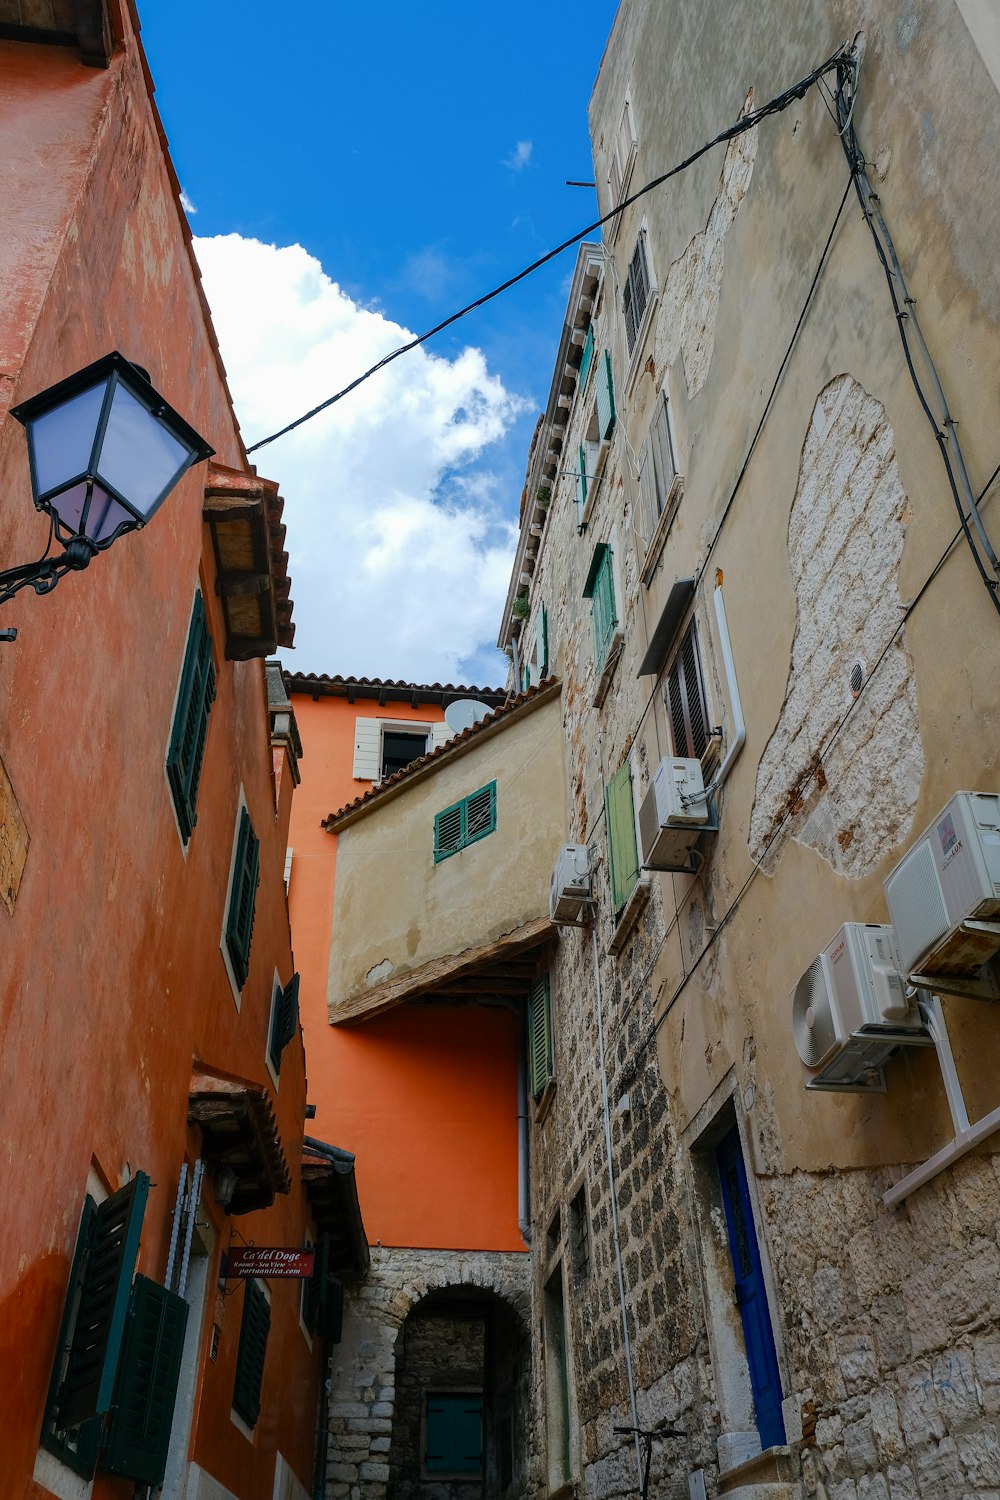 a narrow alleyway between two buildings with green shutters